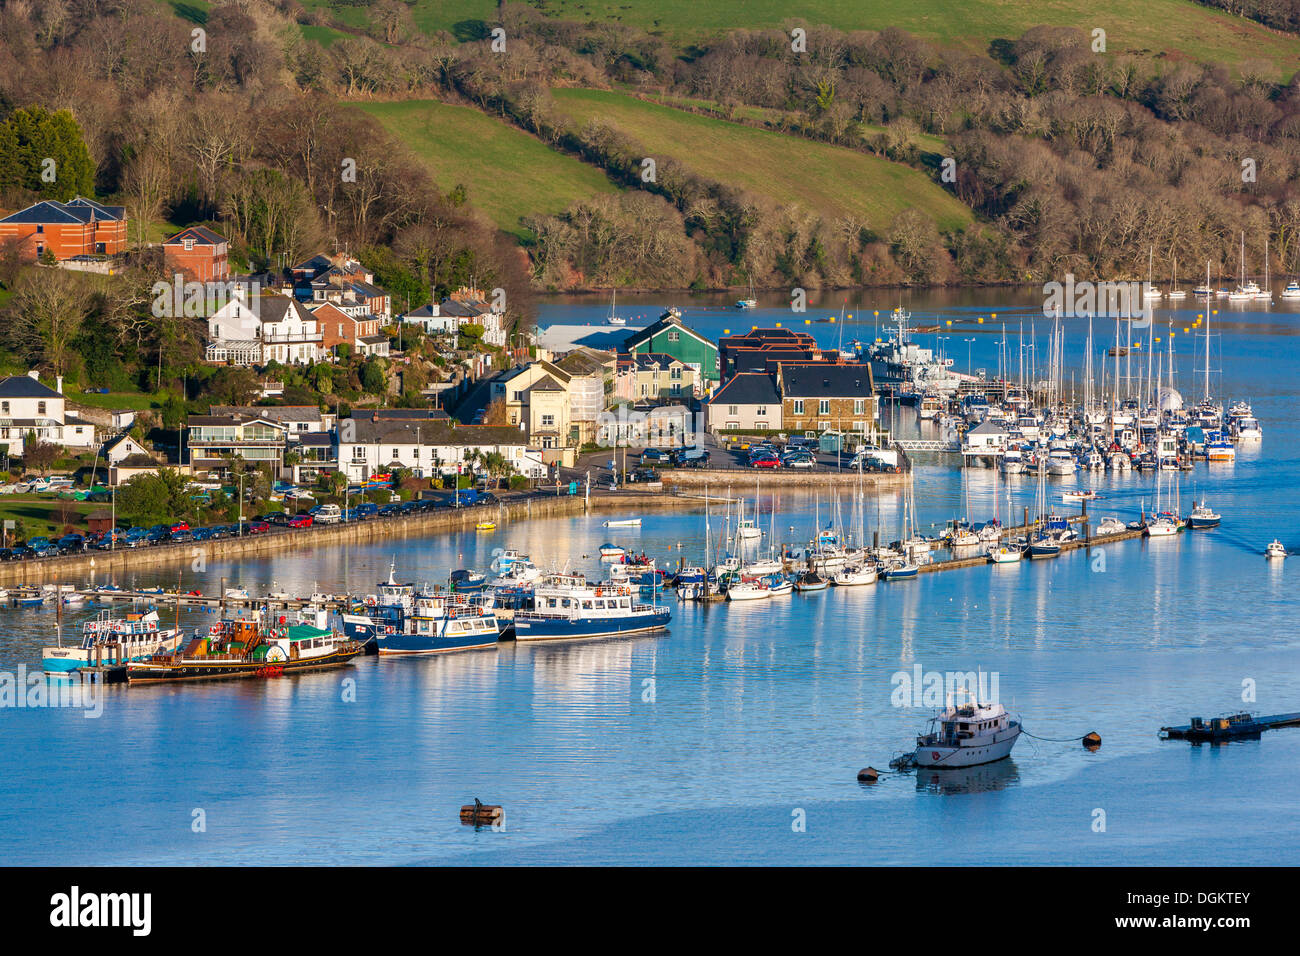 Boats moored on the river Dart with car ferry terminal in the background. Stock Photo